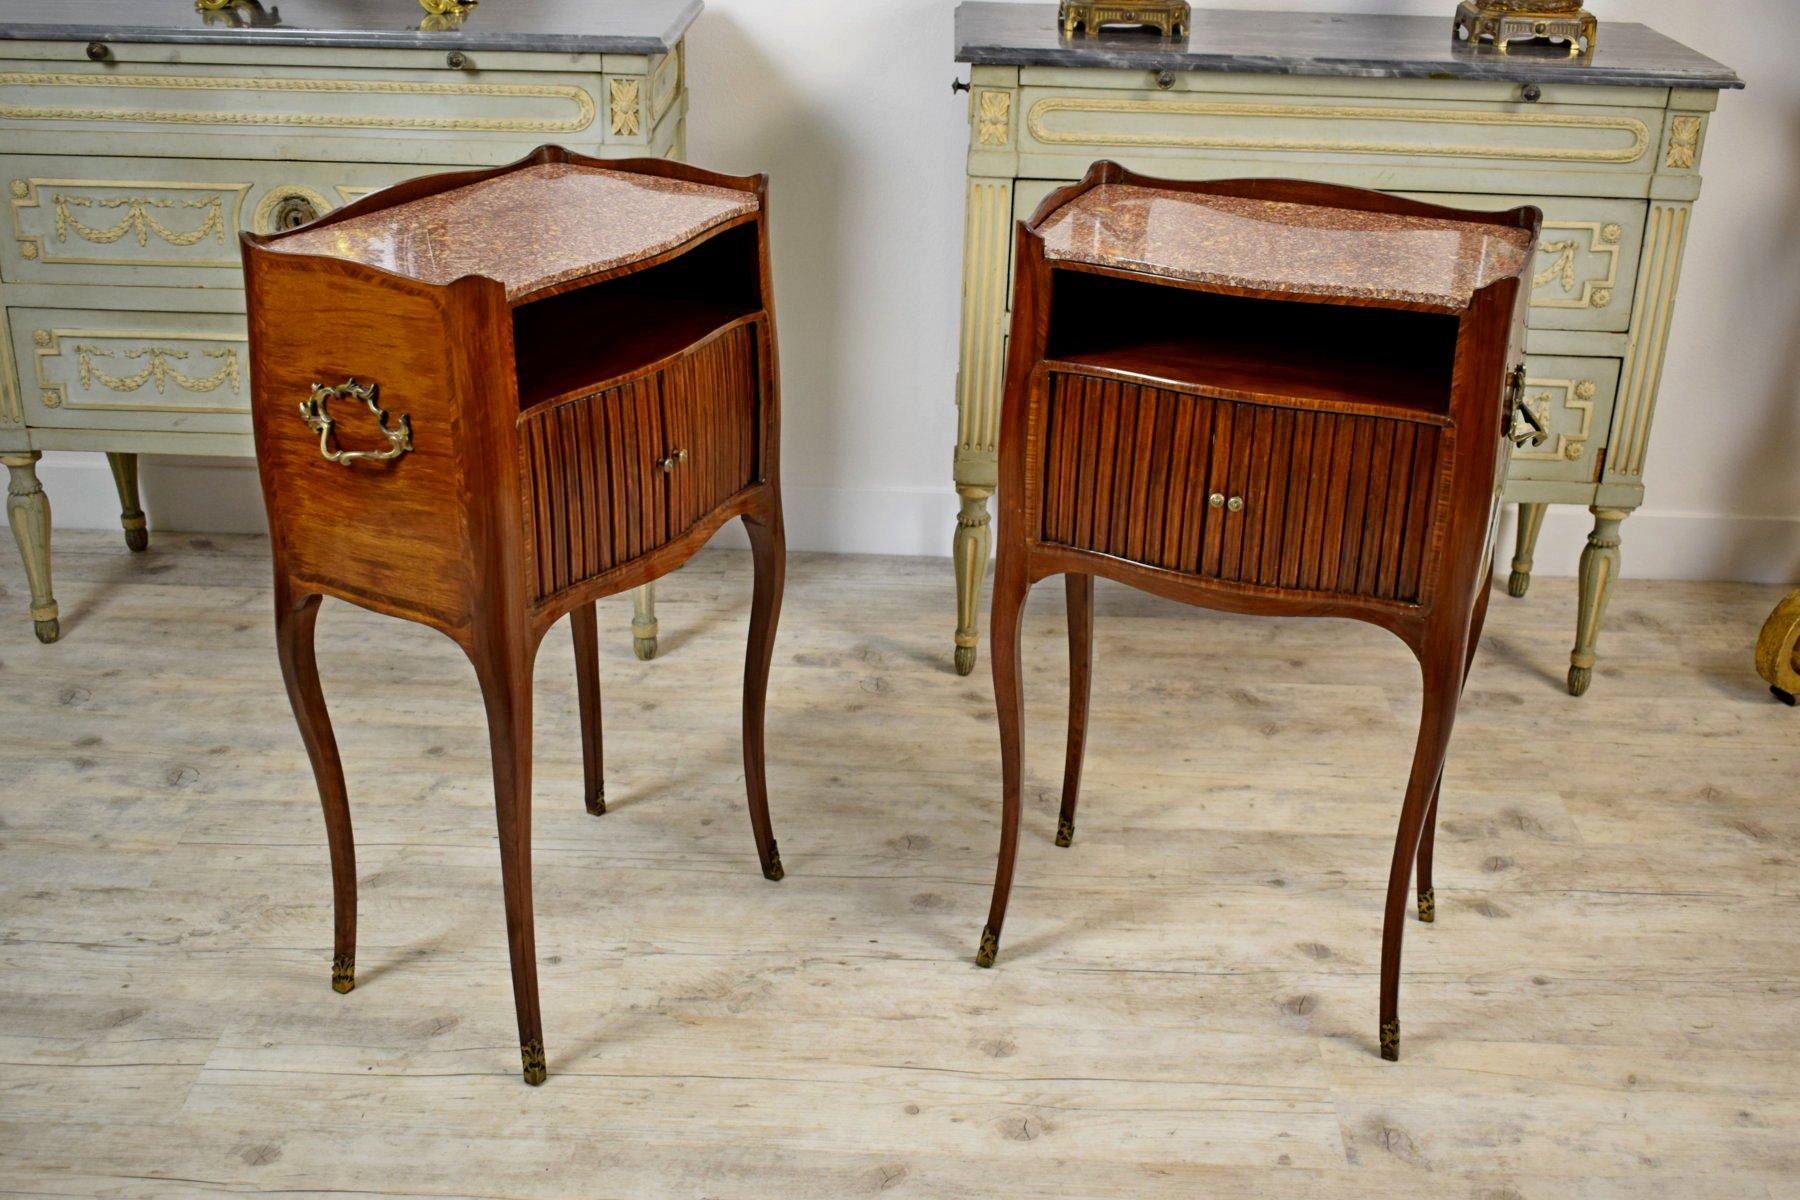 19th century, pair of Italian walnut wood bedside tables

This refined pair of bedside tables was made in Genoa, Italy, circa beginning of the 19th century.
The small walnut furniture, have a very elegant line, with thin arched legs and marble